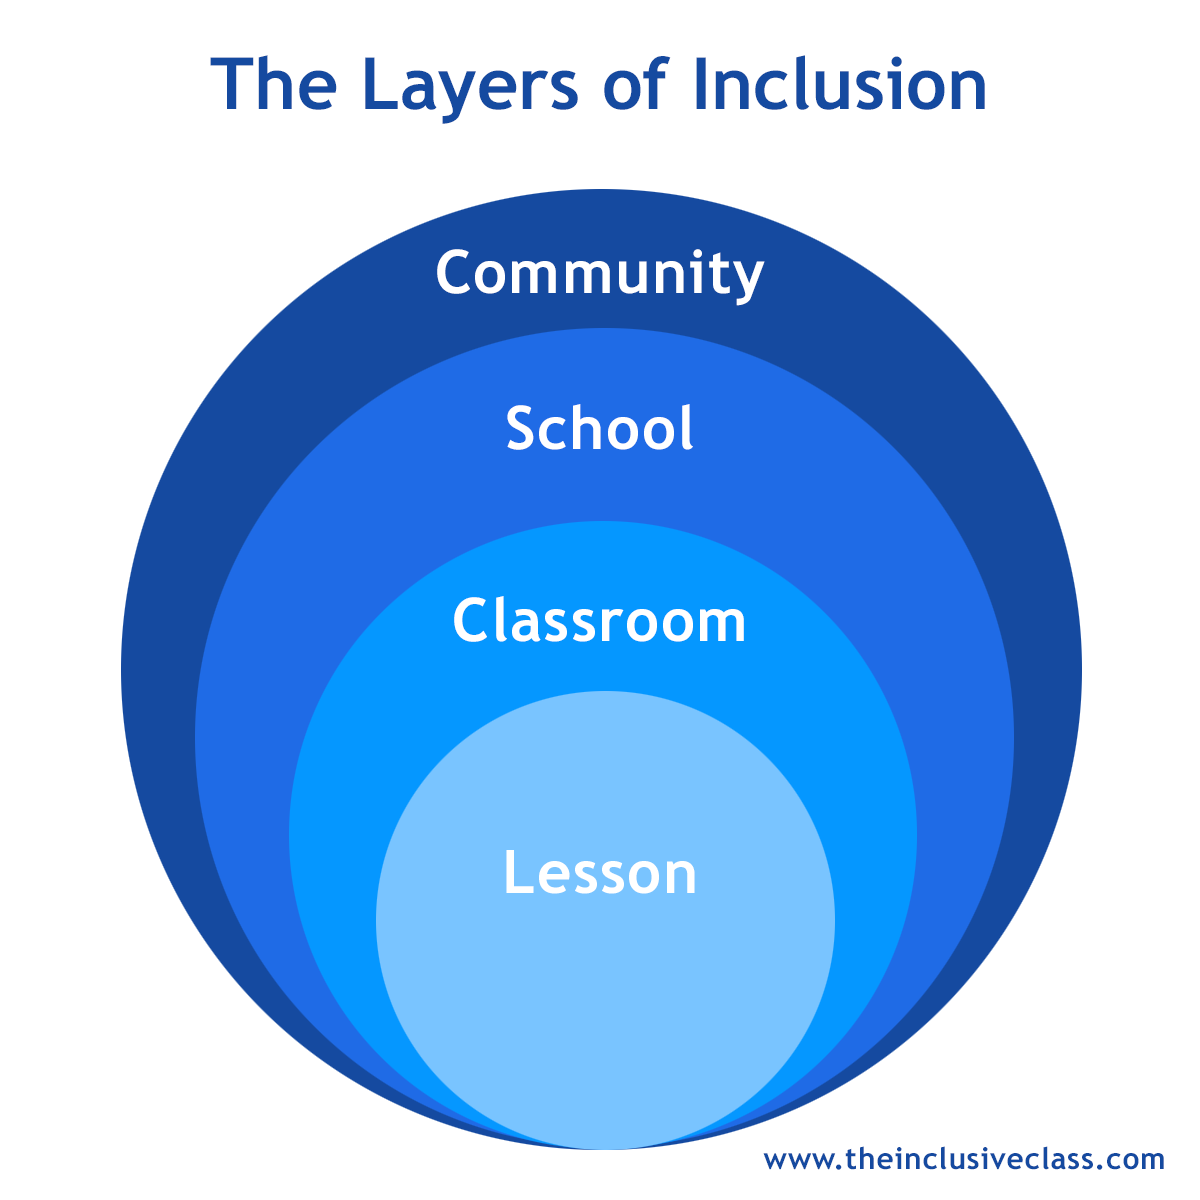 The 4 layers of inclusion: community, school, classroom, lesson